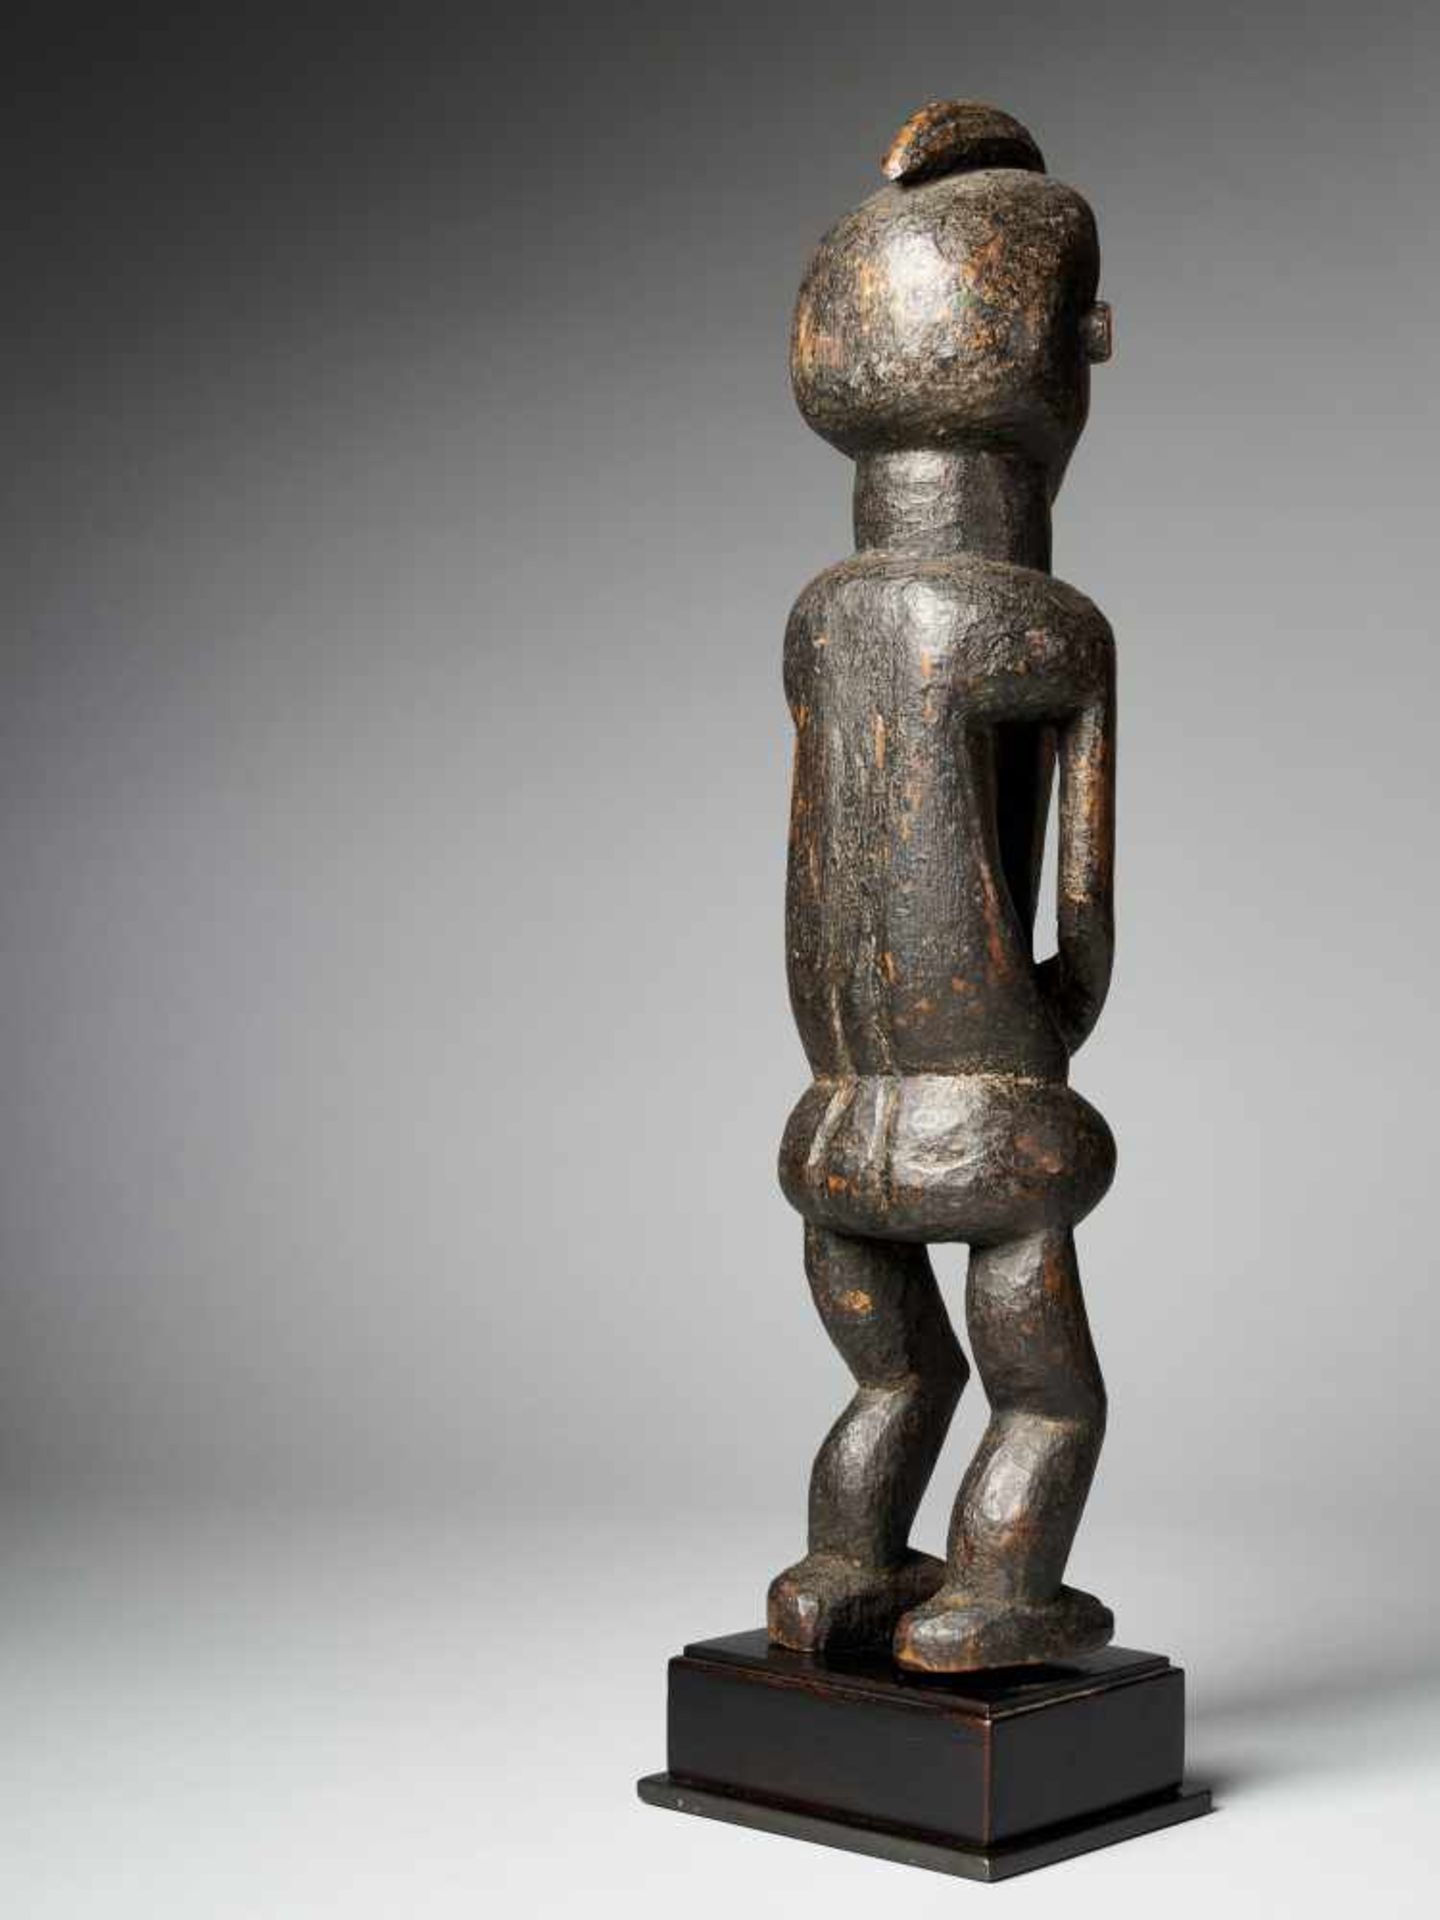 Female Holo statue 'Mvunzi' with traces of Polychrome - Tribal ArtThe Cult statue Mvunzi, represents - Image 4 of 6